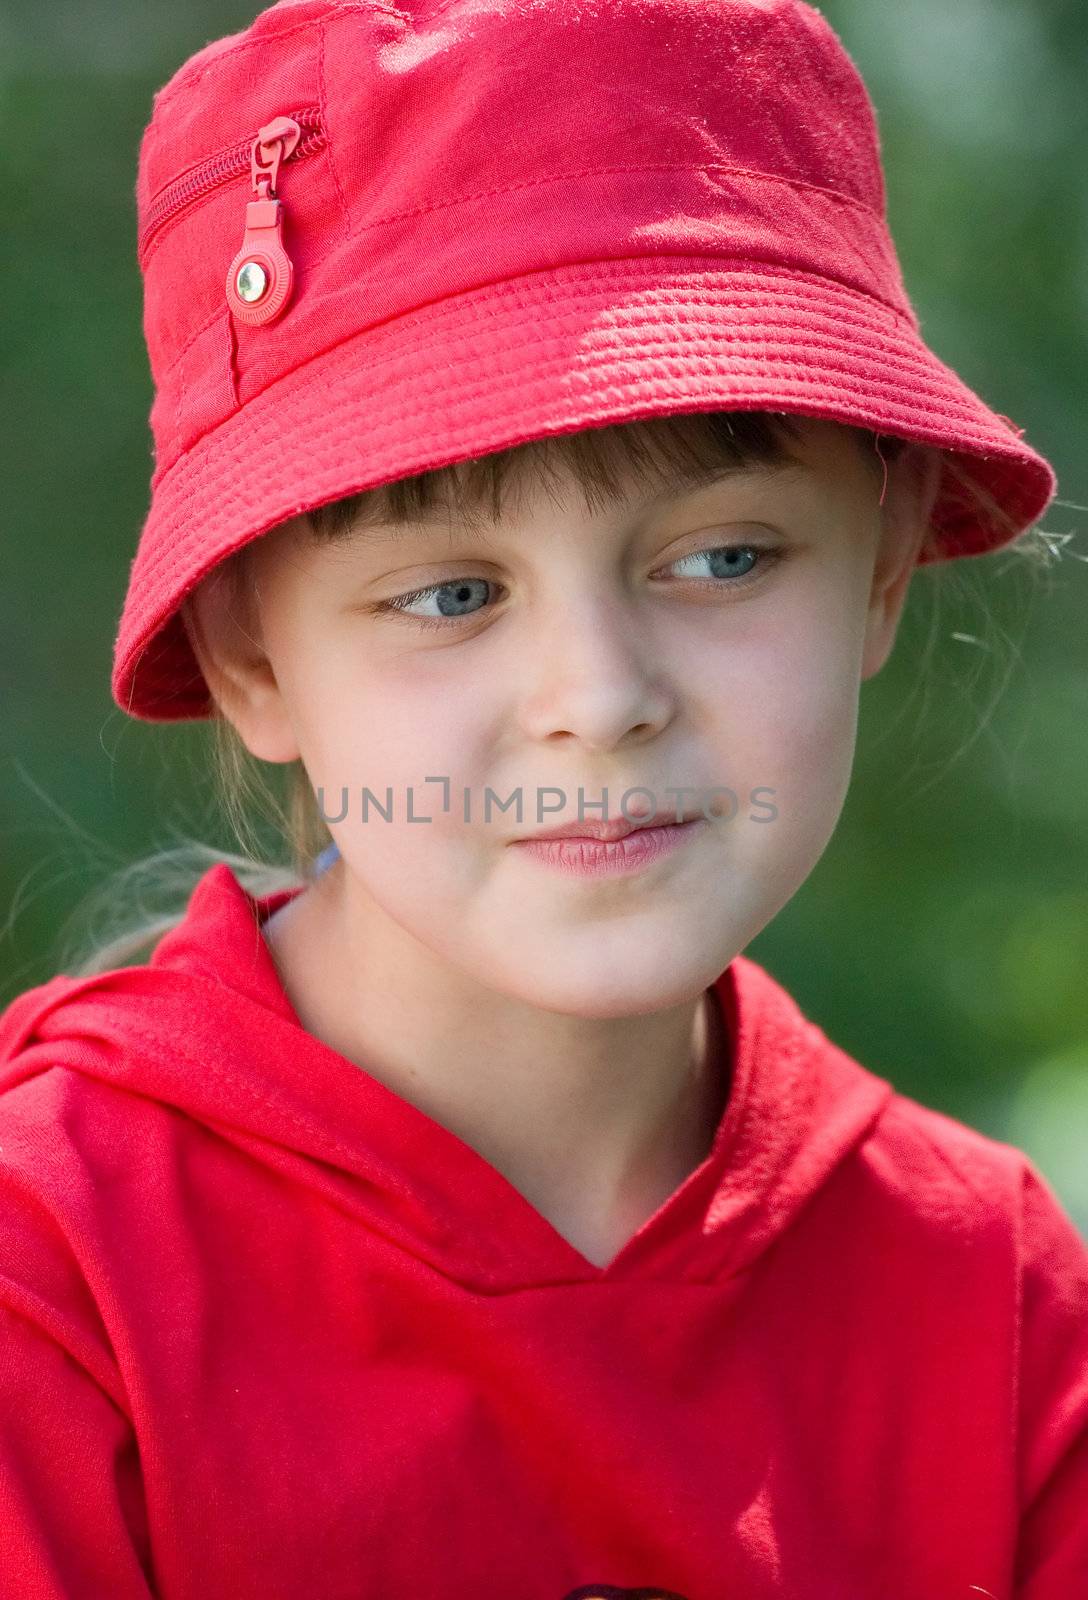 The girl in a red hat by Ohotnik